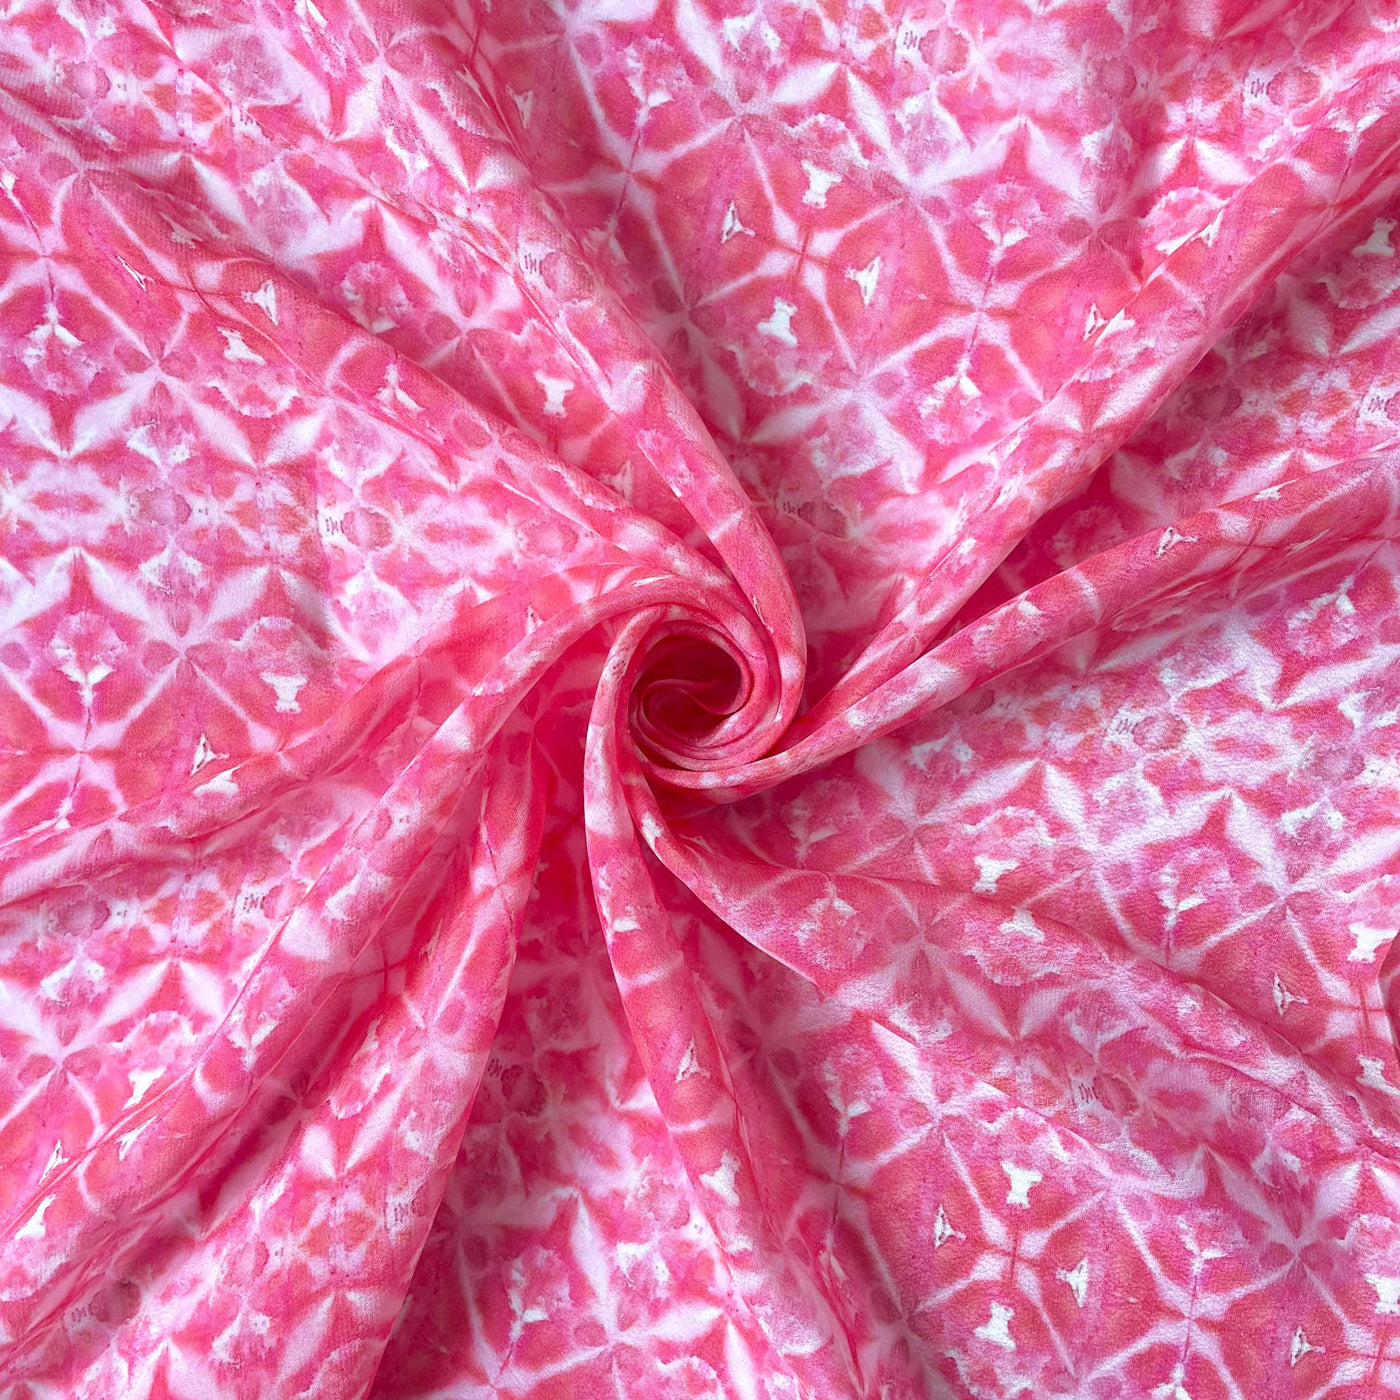 Fabric Pandit Fabric Bright Pink and White Abstract Geometric Digital Printed Pure Crepe Fabric (Width 43 Inches)